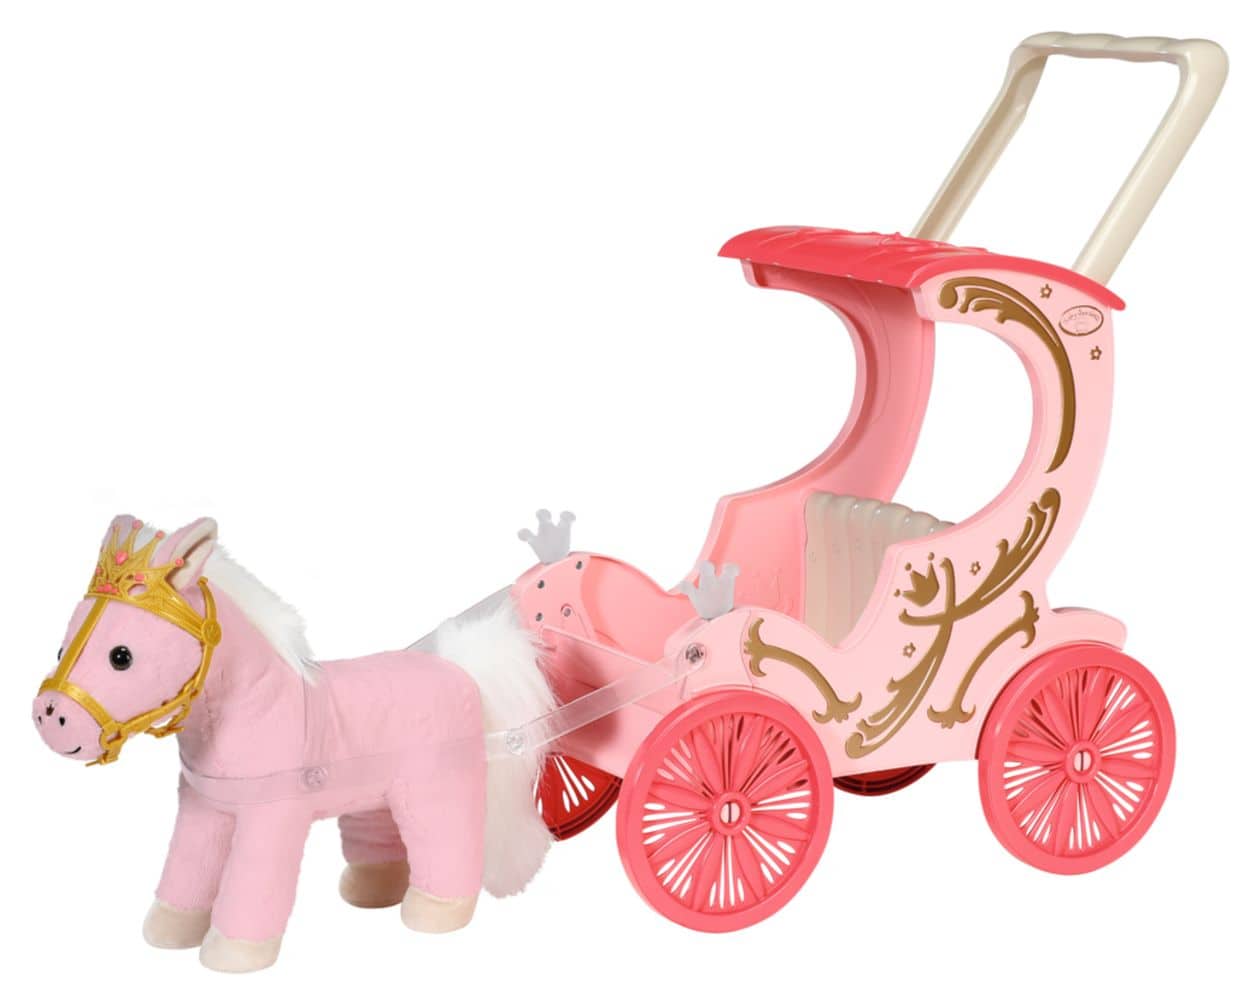 Little Sweet Carriage & Pony 